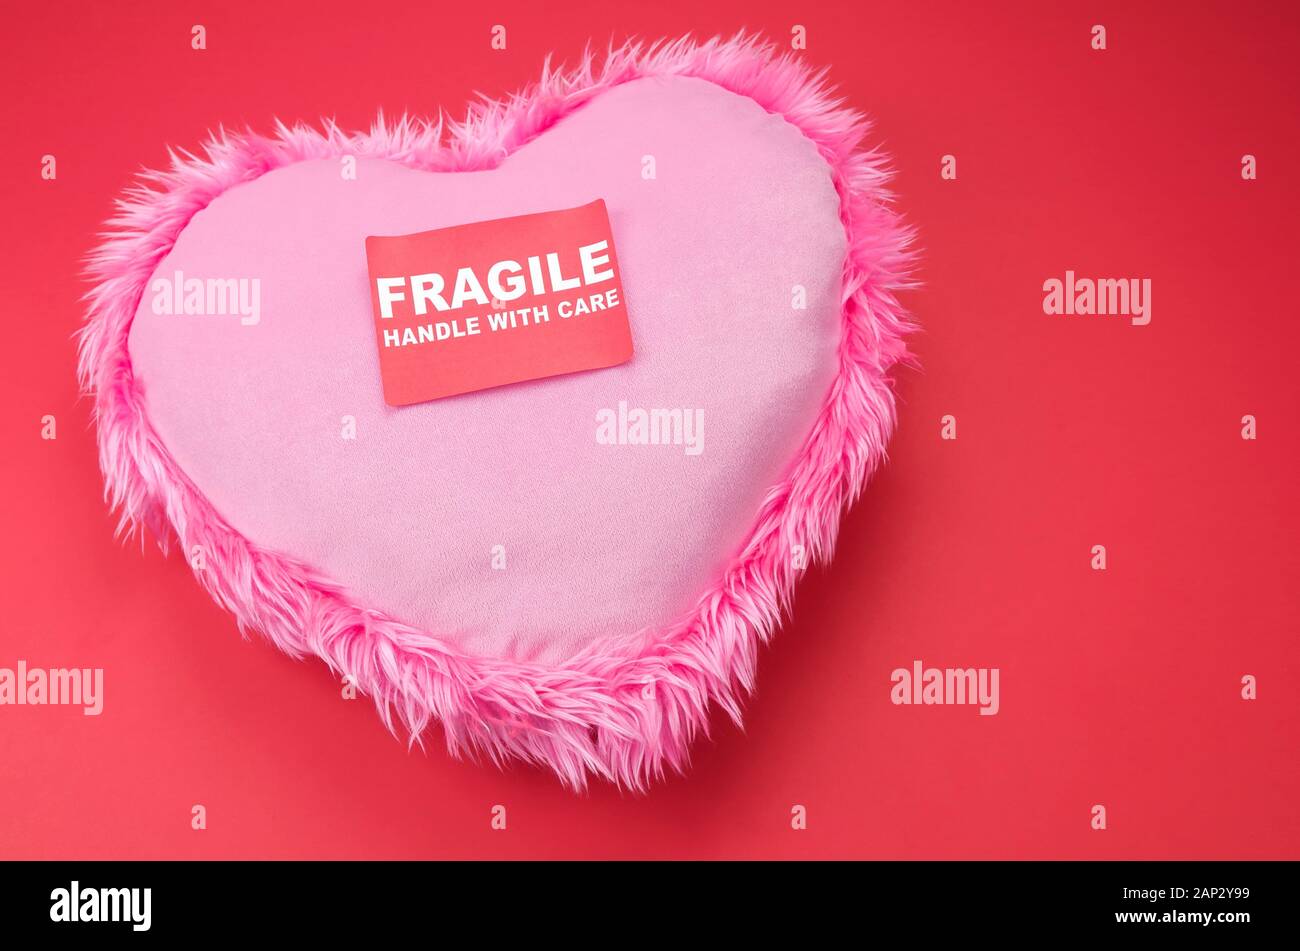 Pink heart with furry trim sitting on a bright red background with a Fragile Handle With Care Sticker Stock Photo